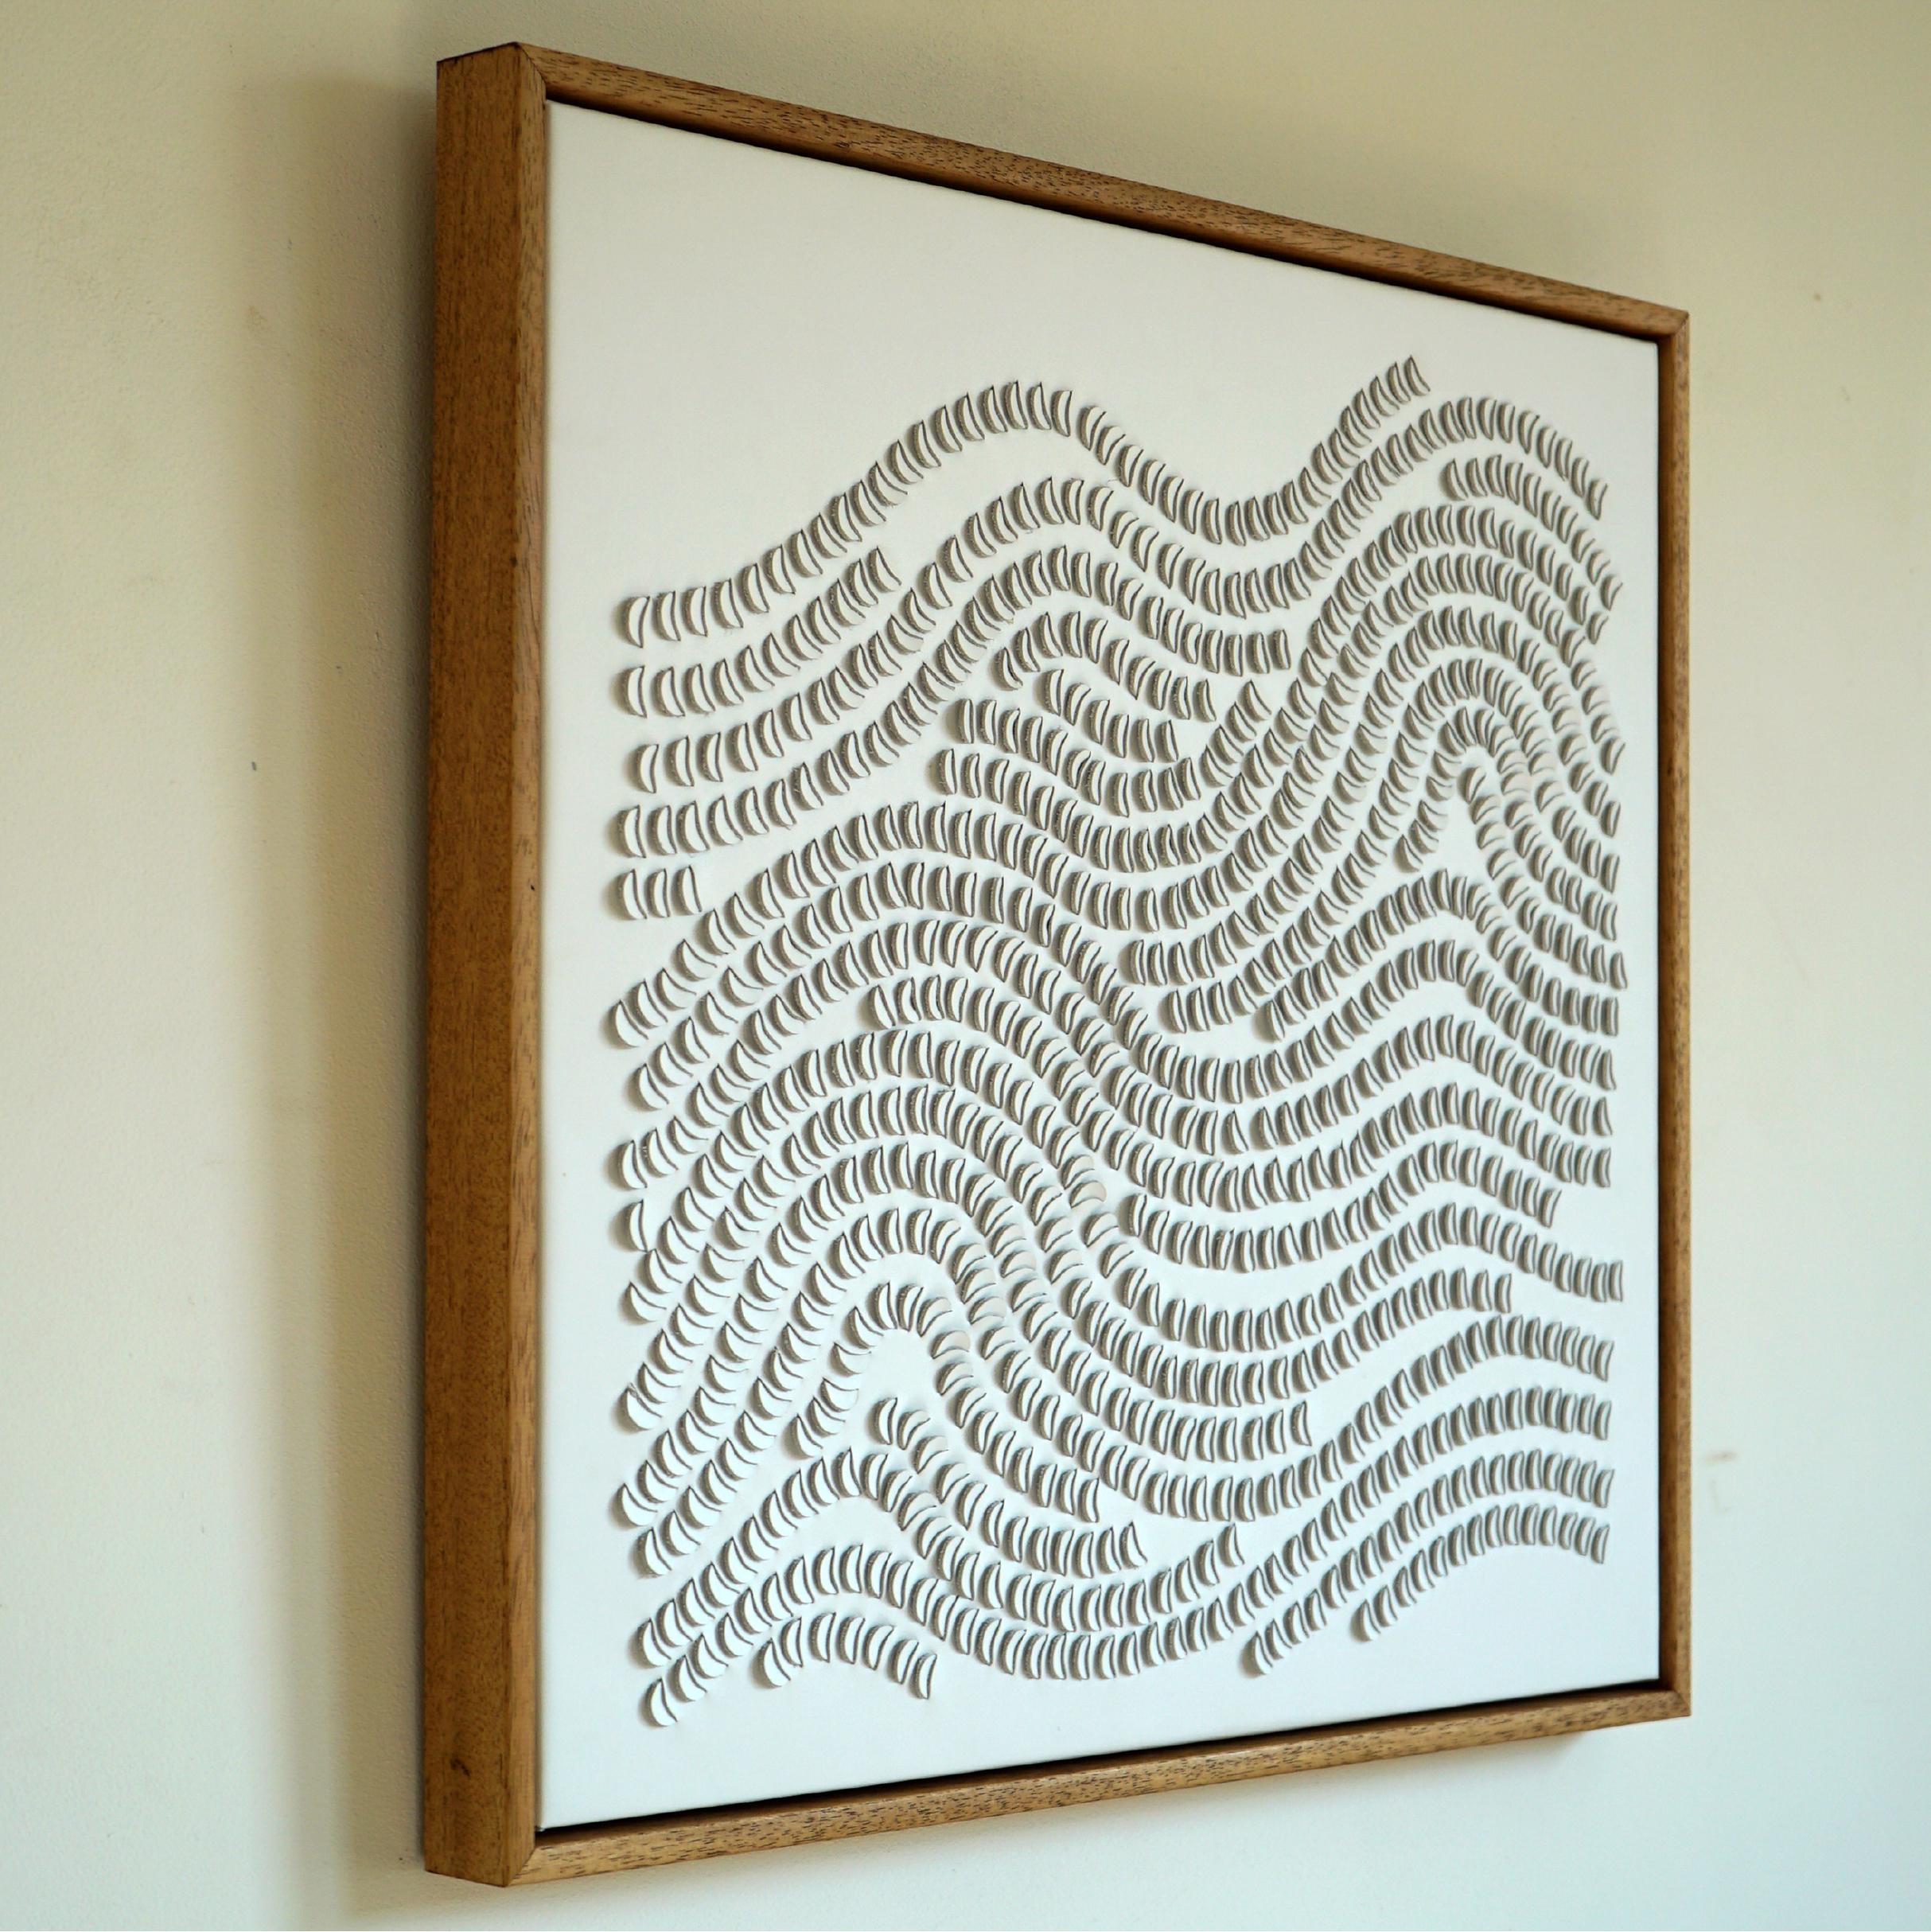 Disks:

A piece of 3D sculptural wall art designed and made from two layers of white leather, woven together by Louise Heighes.
Measurements are 21 x 21 inches or 54 x 54 cm.

One, single curved element has been repeated over and over again giving